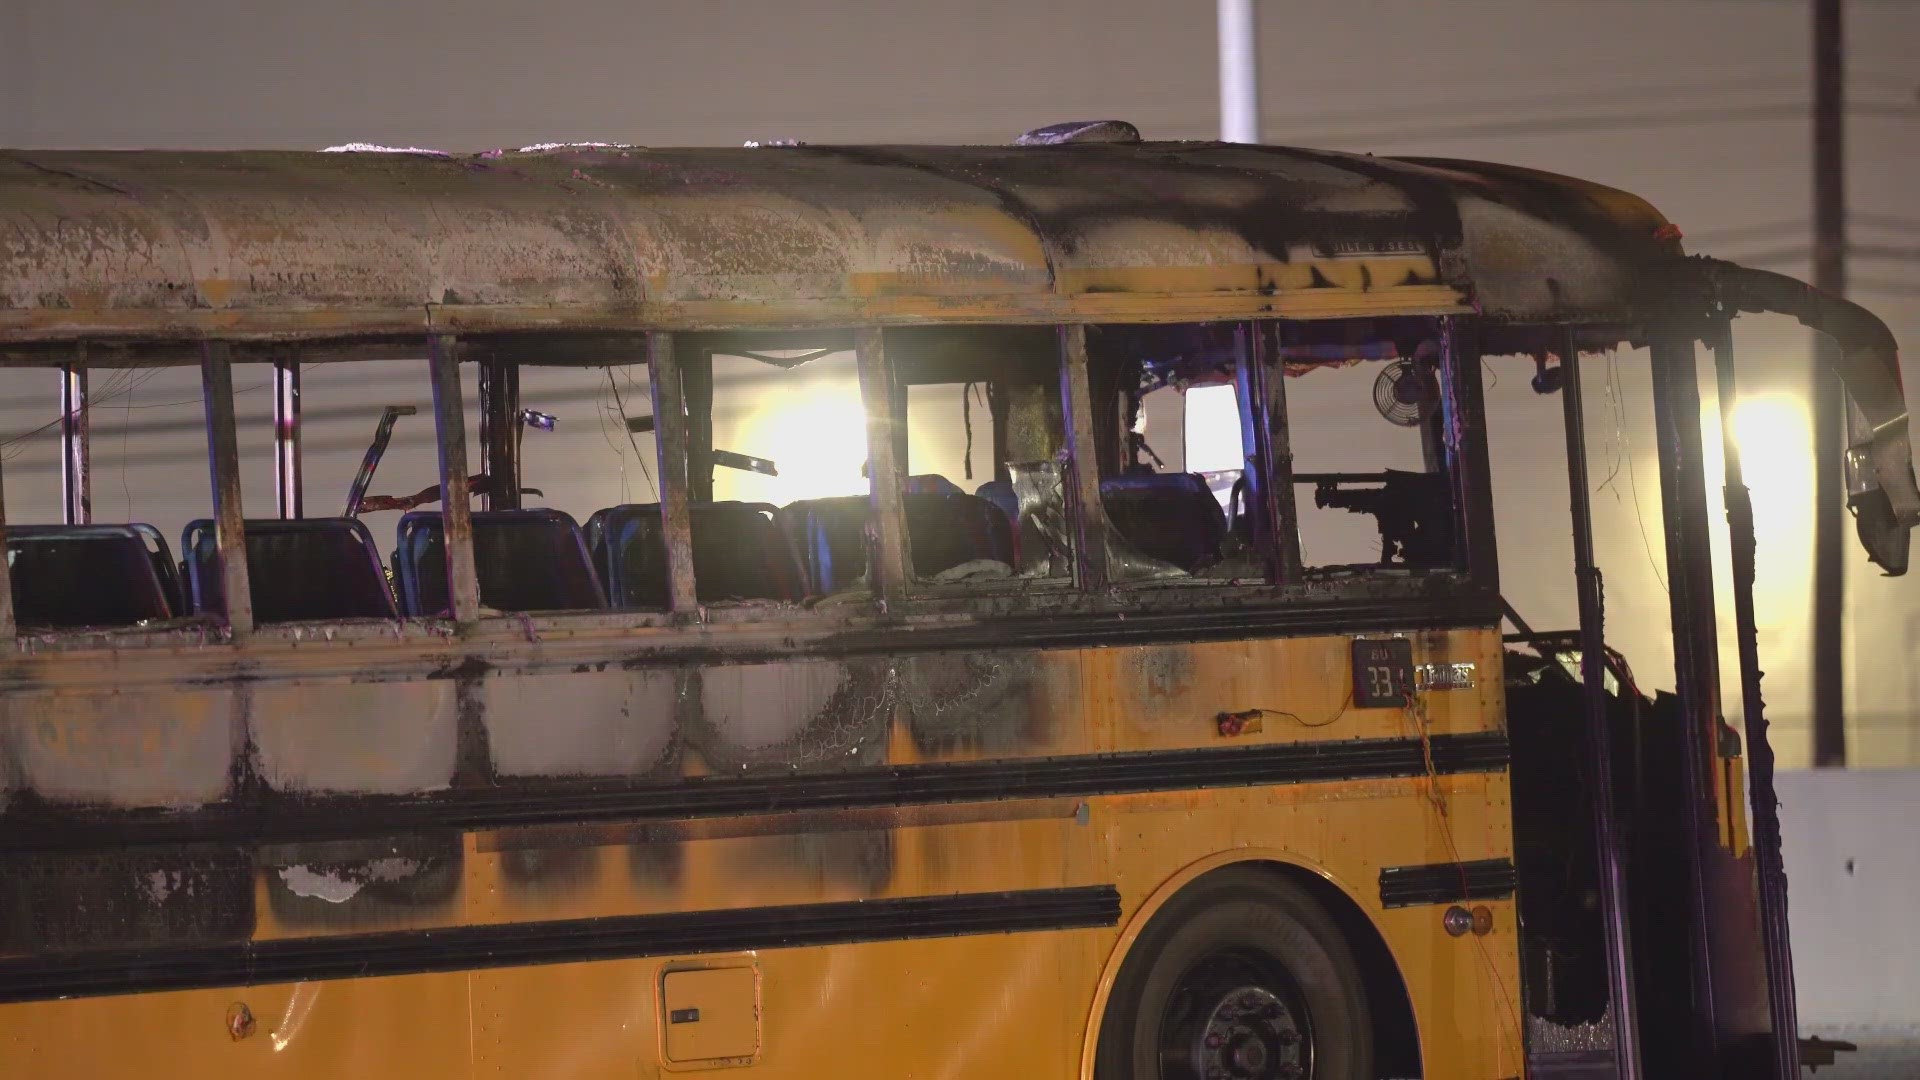 Police say a man purchased two school buses at a San Antonio auction and was in the process of transporting them when he noticed one of the buses on fire.